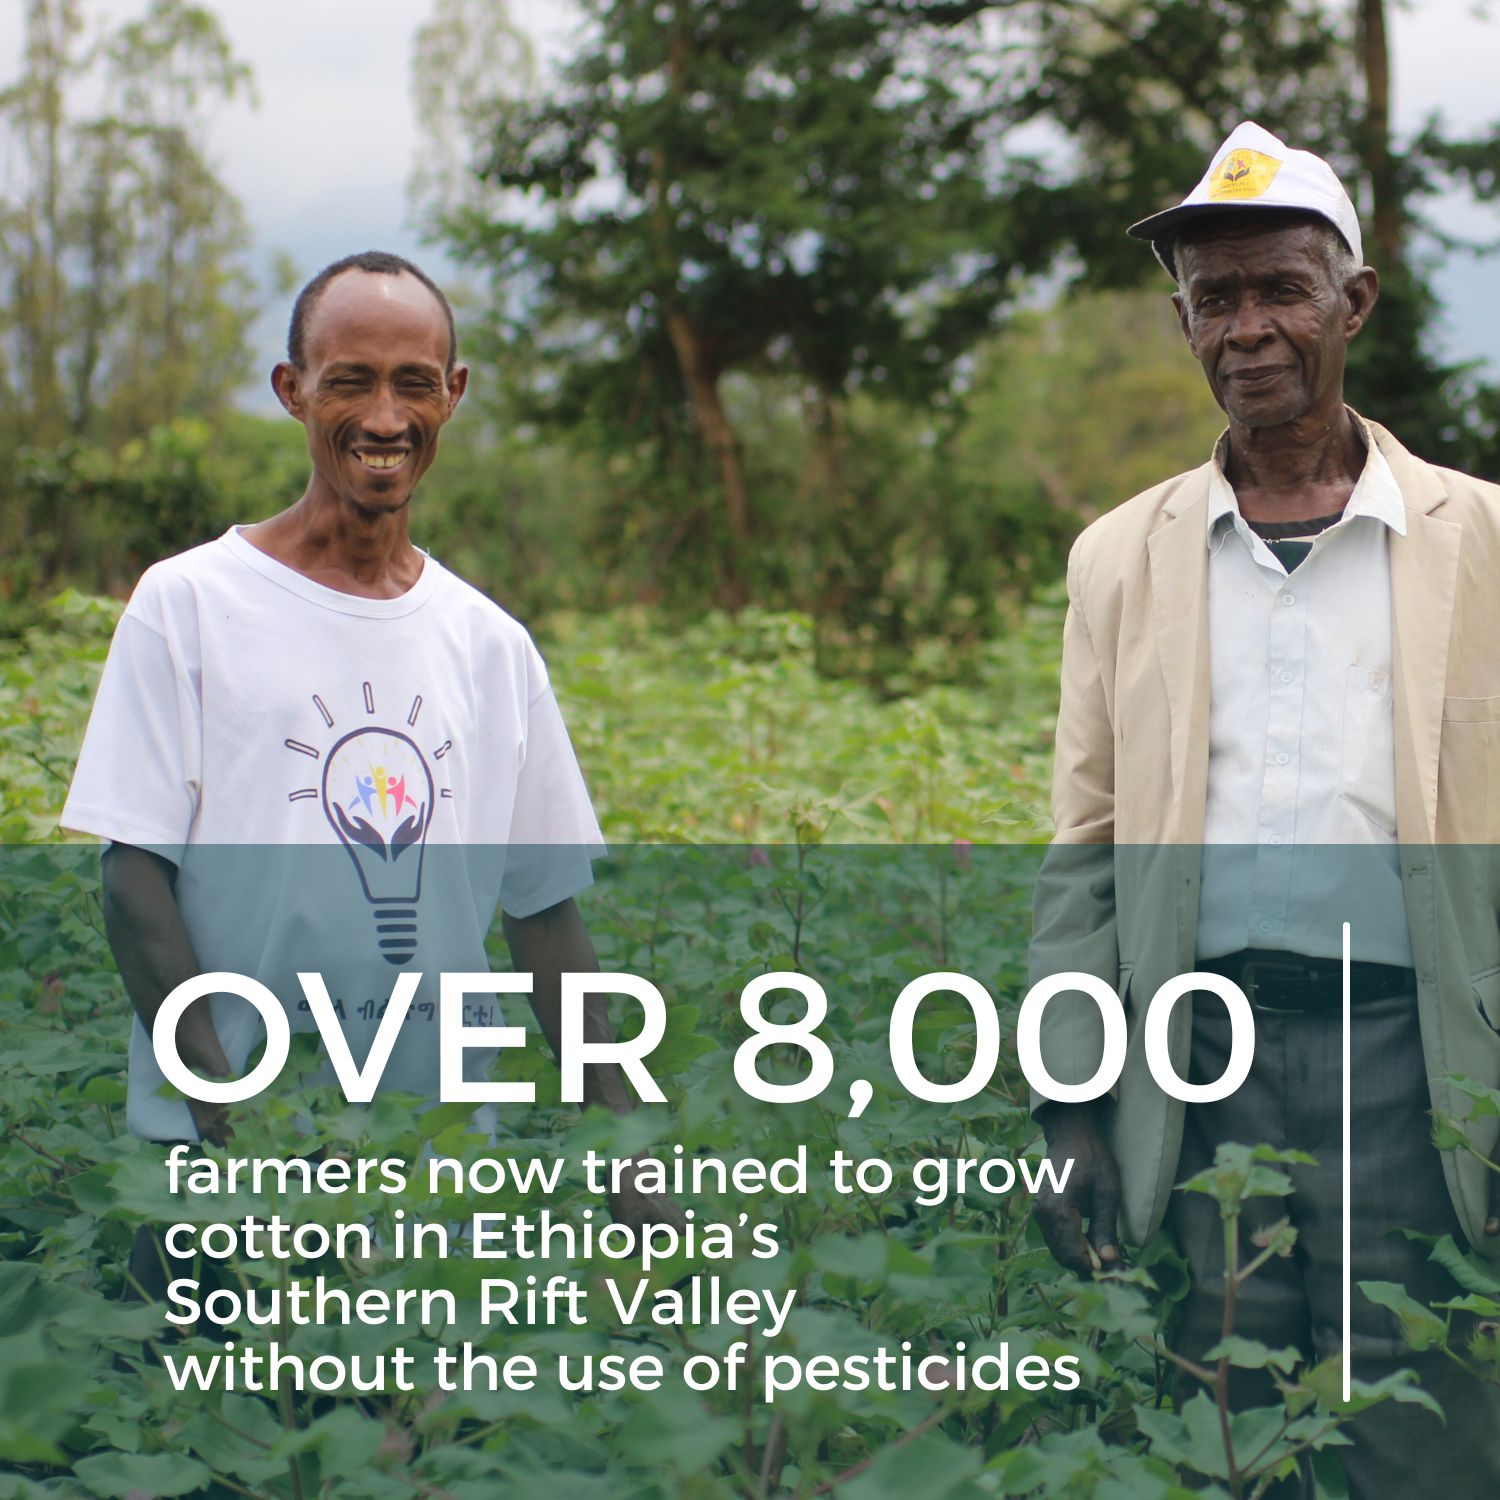 Over 8,000 farmers trained to grow cotton in Ethiopia's Southern Rift Valley without the use of pesticides